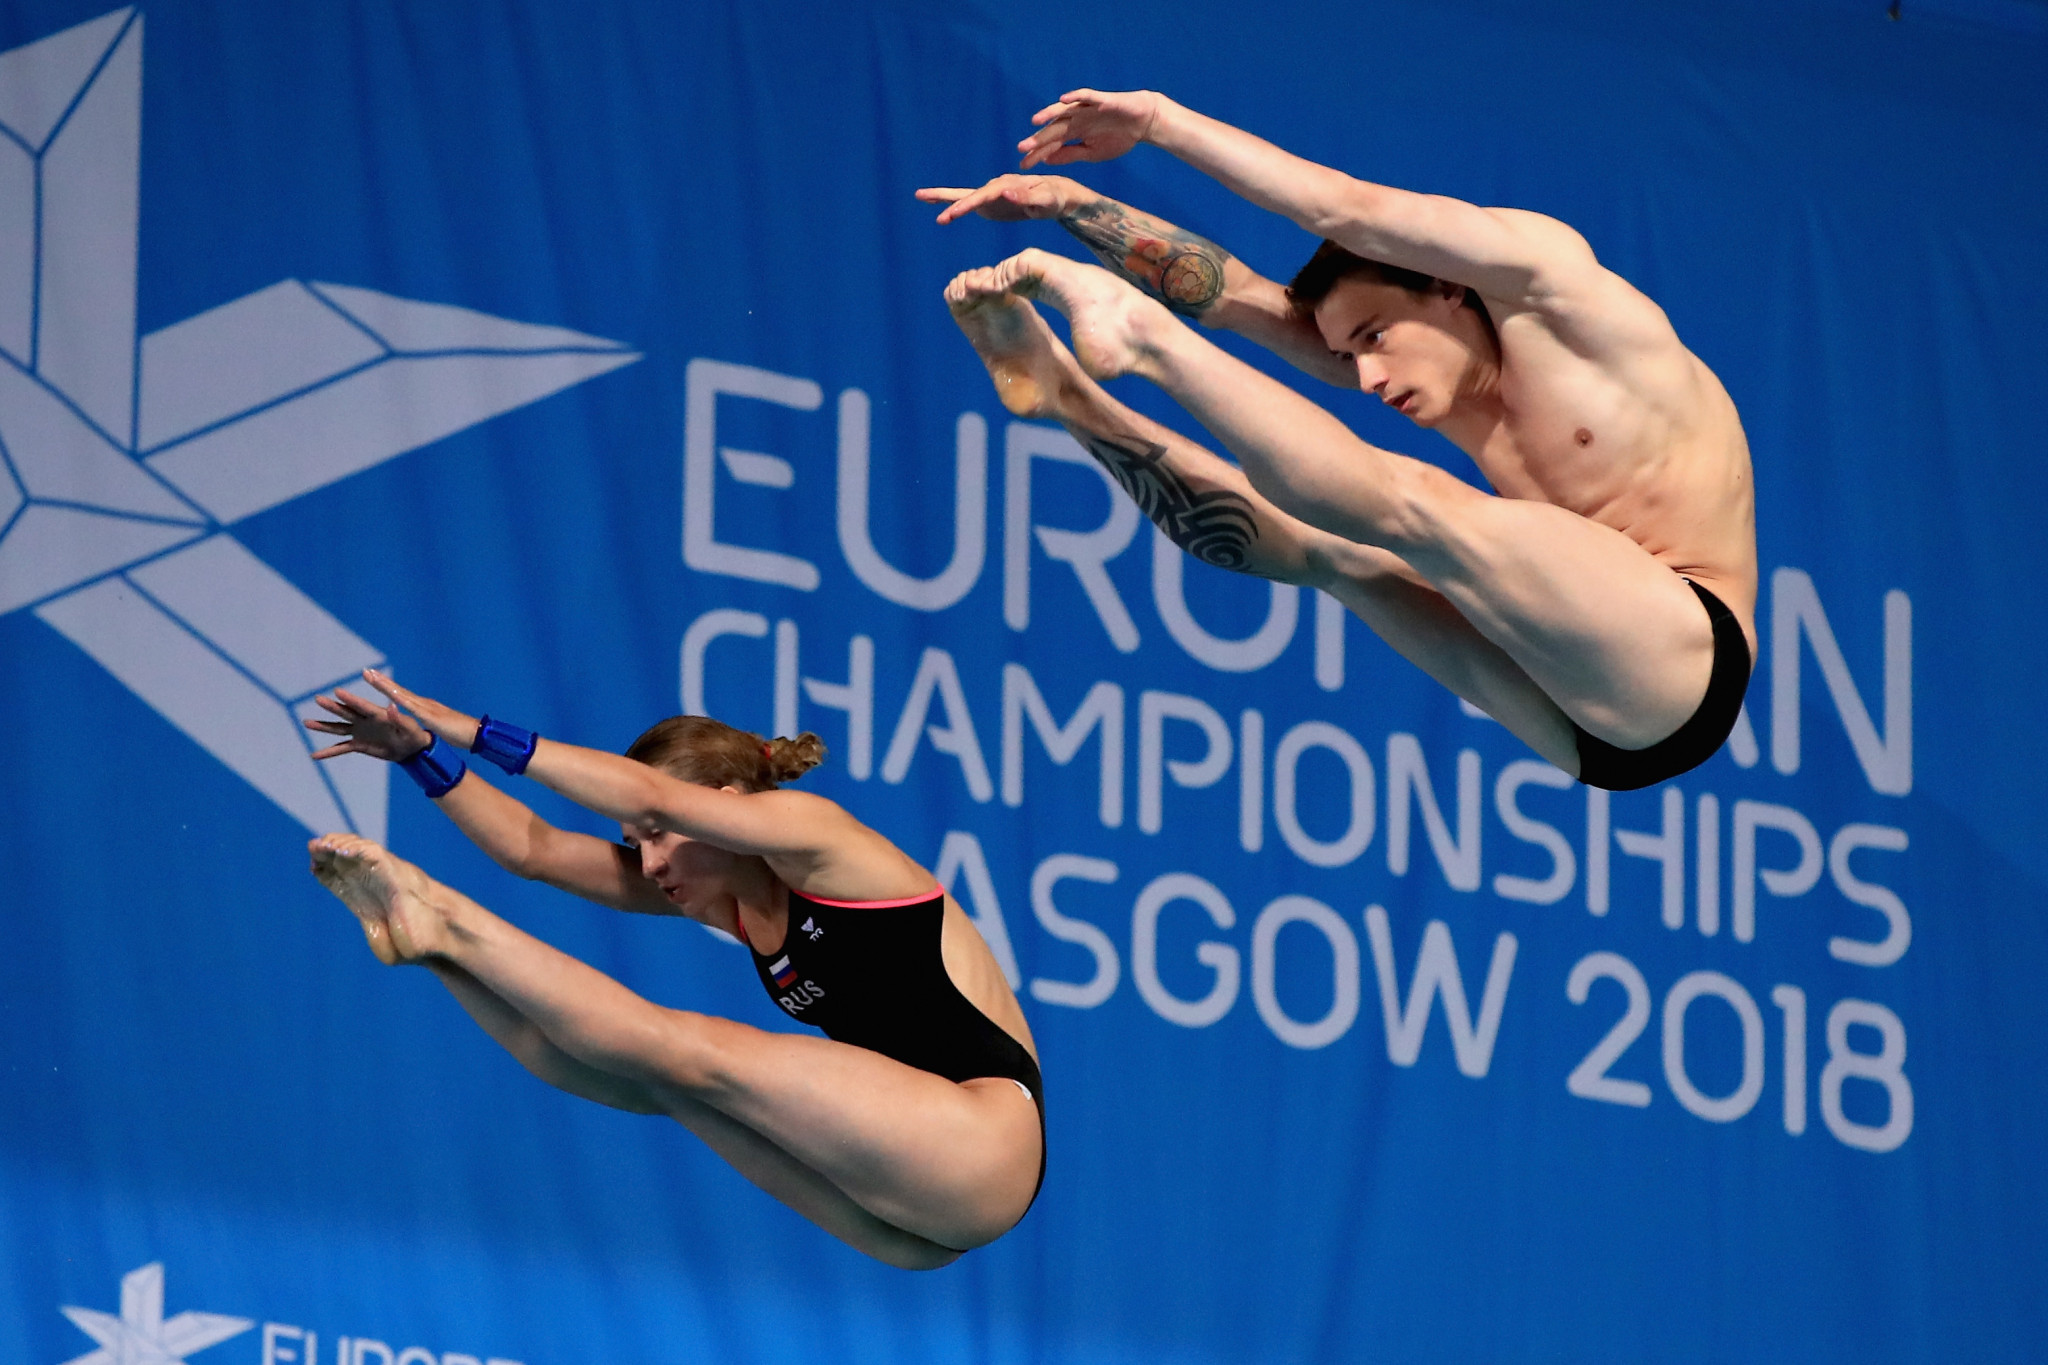 Russia's Yulia Timoshinina and Nikita Shleikher secured victory in the mixed synchronised 10m platform final ©Getty Images